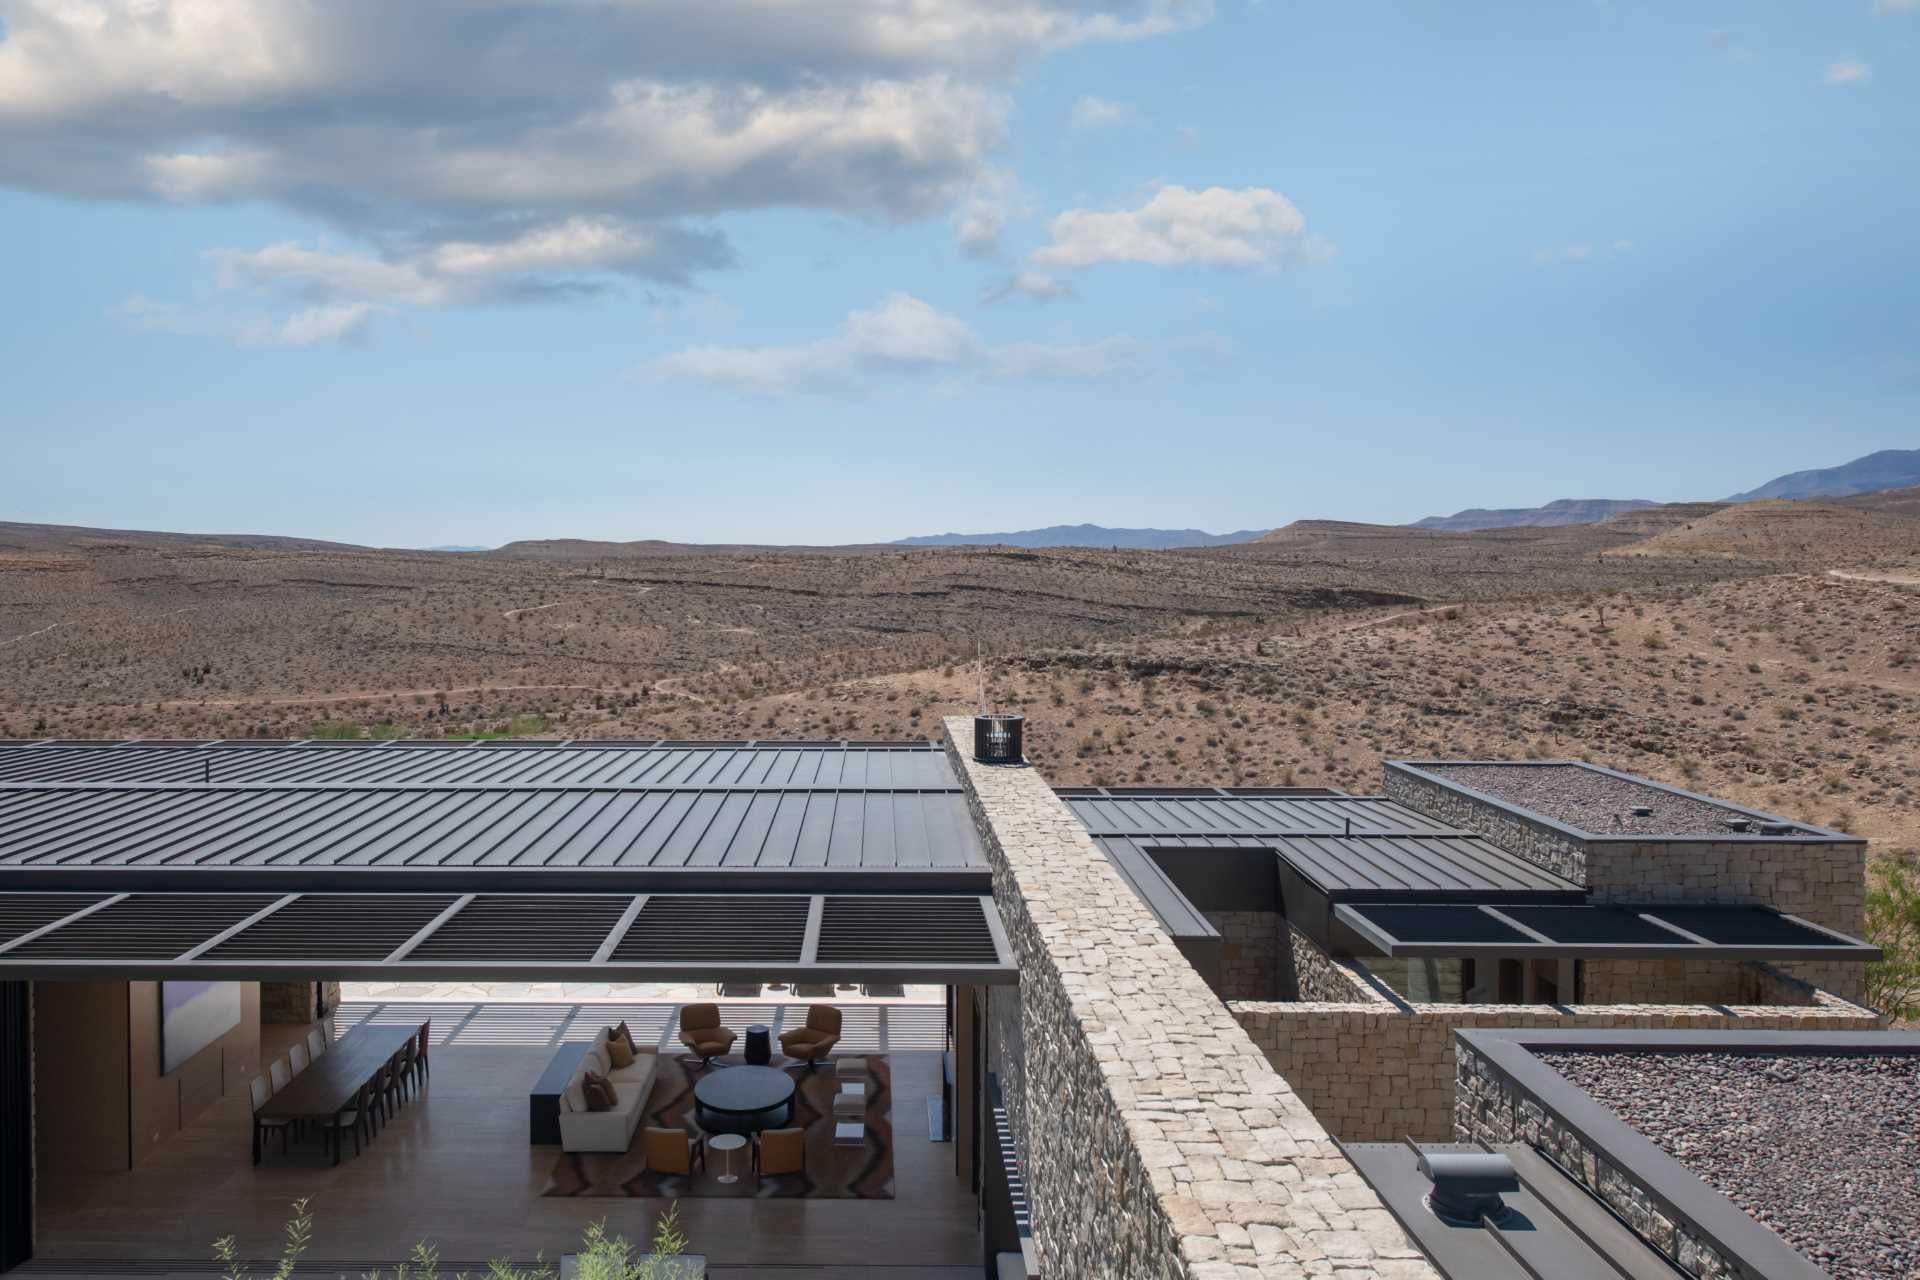 A modern home in the desert features weathered and hot rolled steel, stone walls, sliding glass panel walls, and travertine.